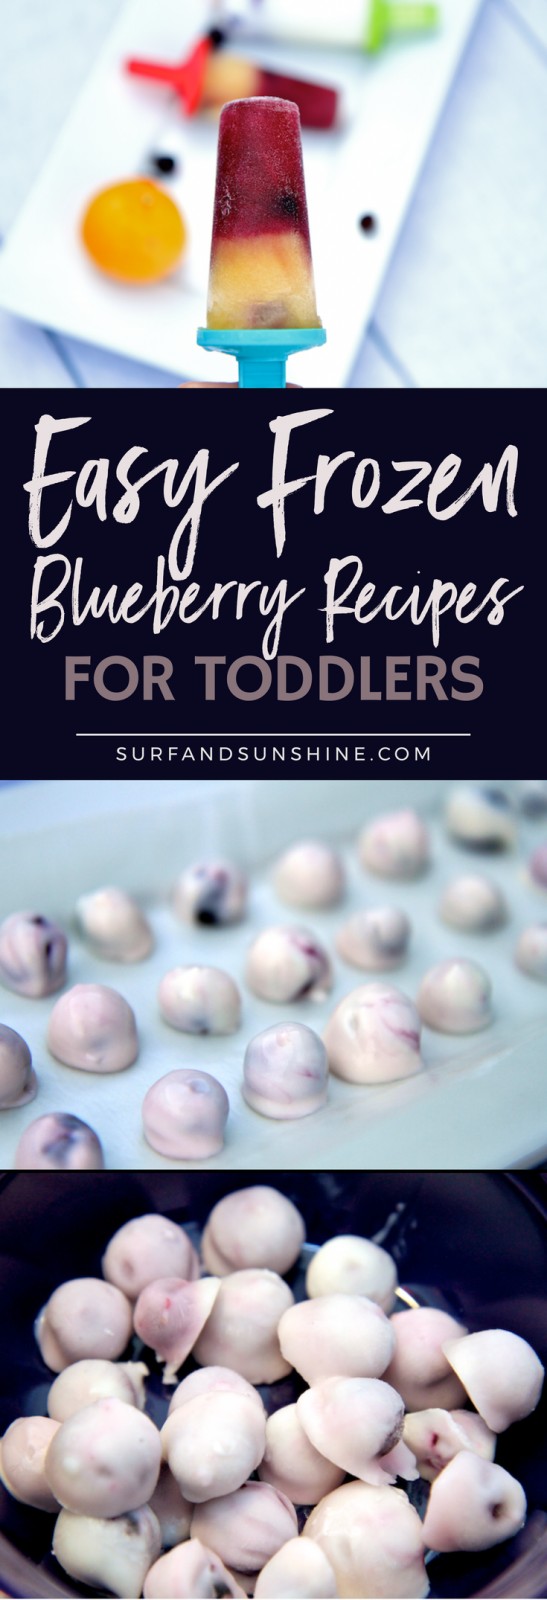 easy frozen blueberry recipes for toddlers